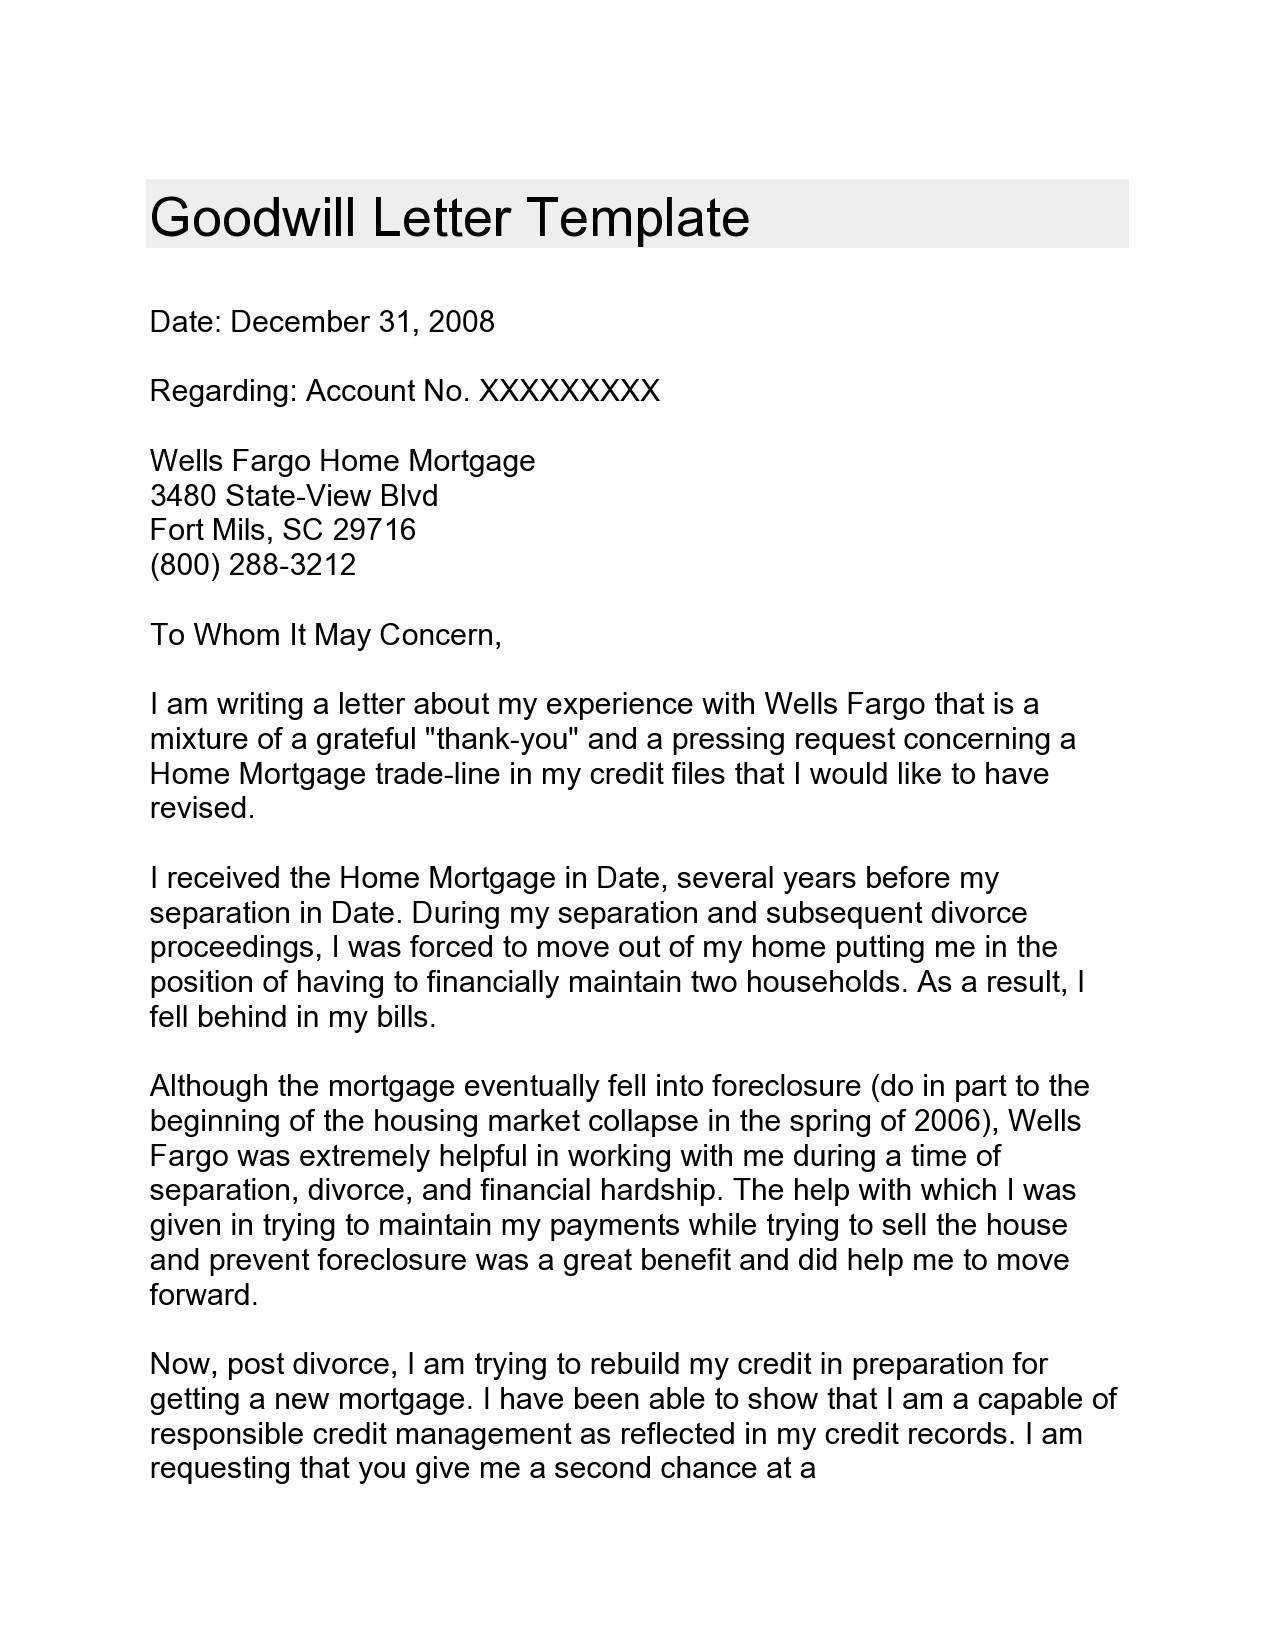 Free goodwill letter template 27